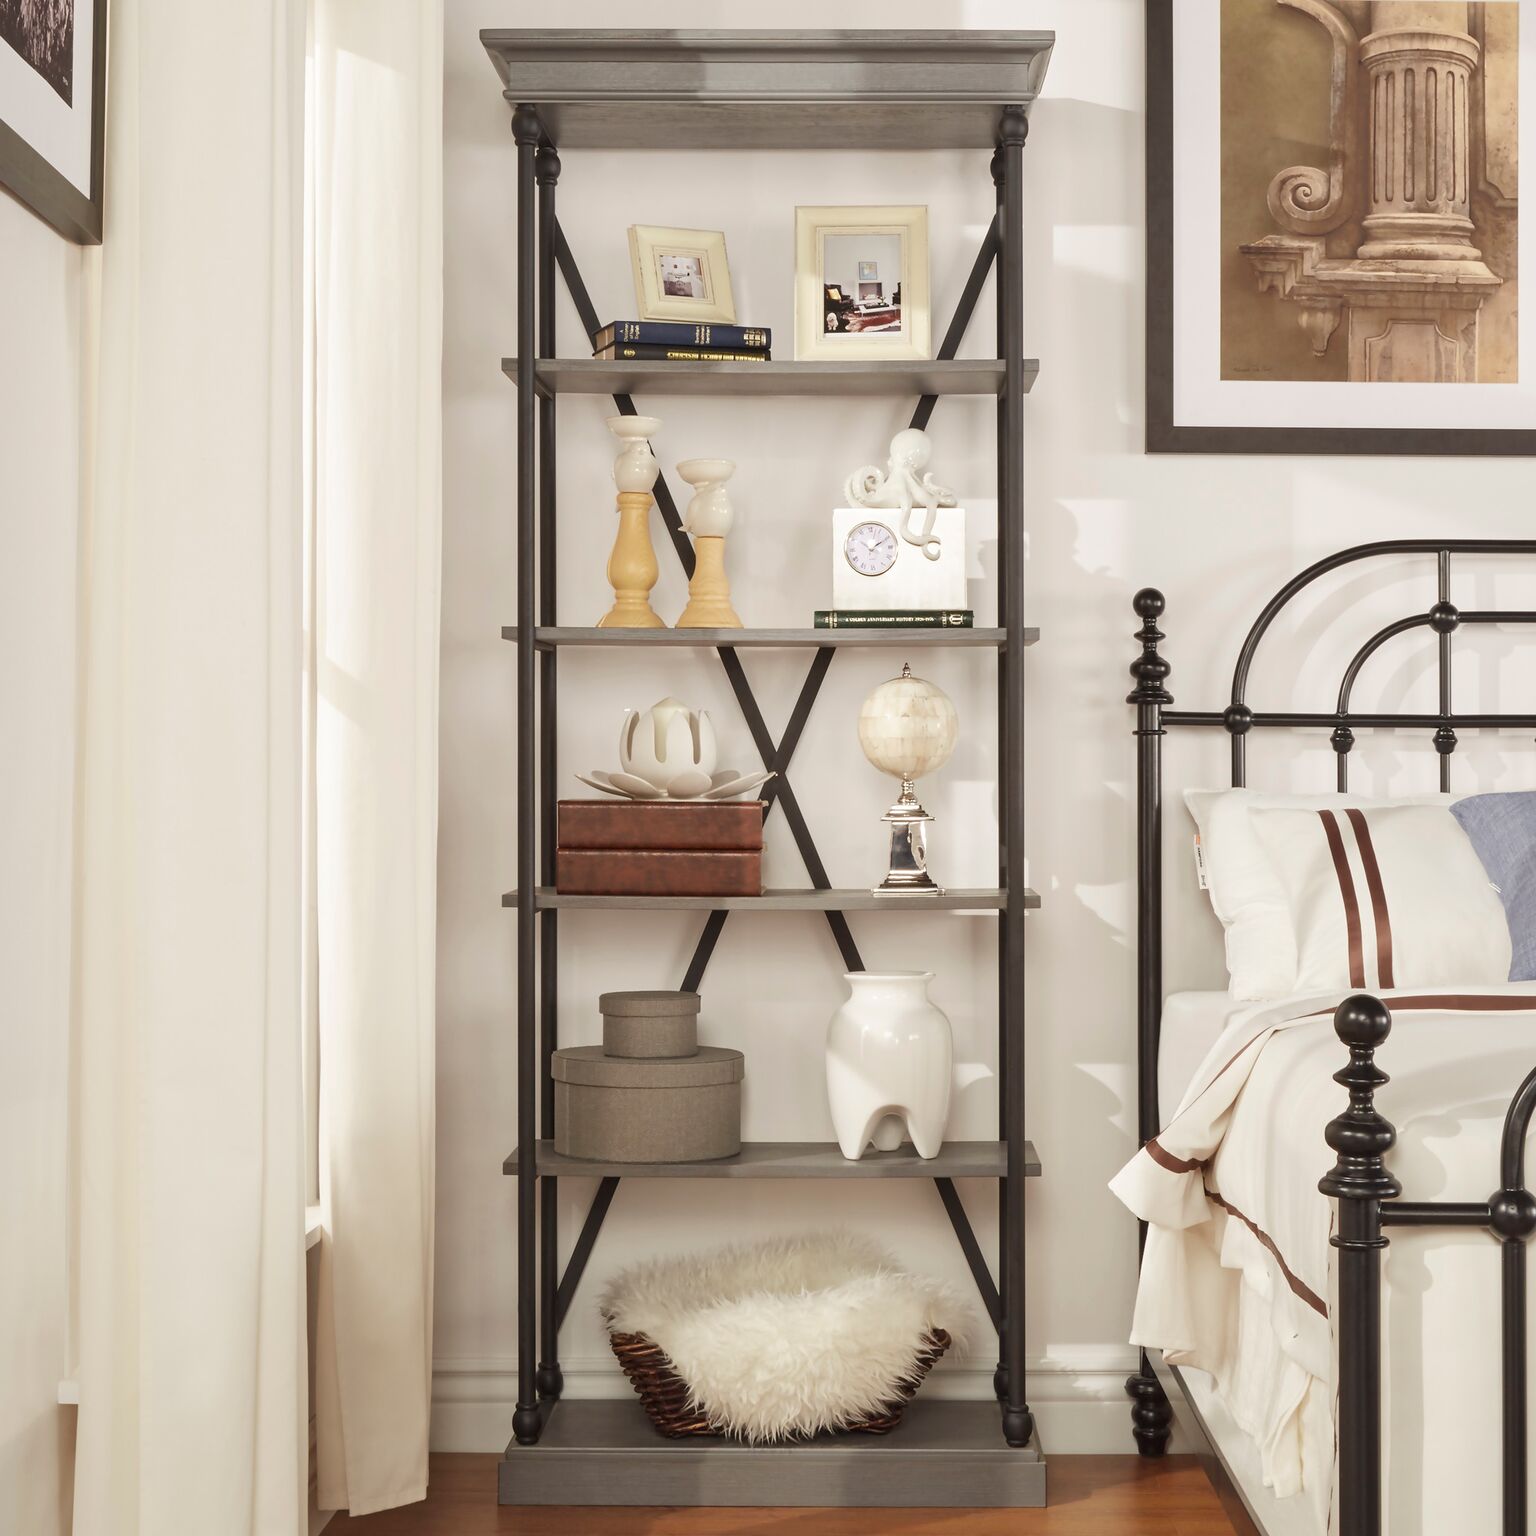 To illustrate etagere design, this image shows the Cornice Etagere Bookcase by iNSPIRE Q Artisan in a grey finish. The bookcase is placed next to a bed and is decorated with home accessories. With the etagere design, all eyes go to the décor displayed.